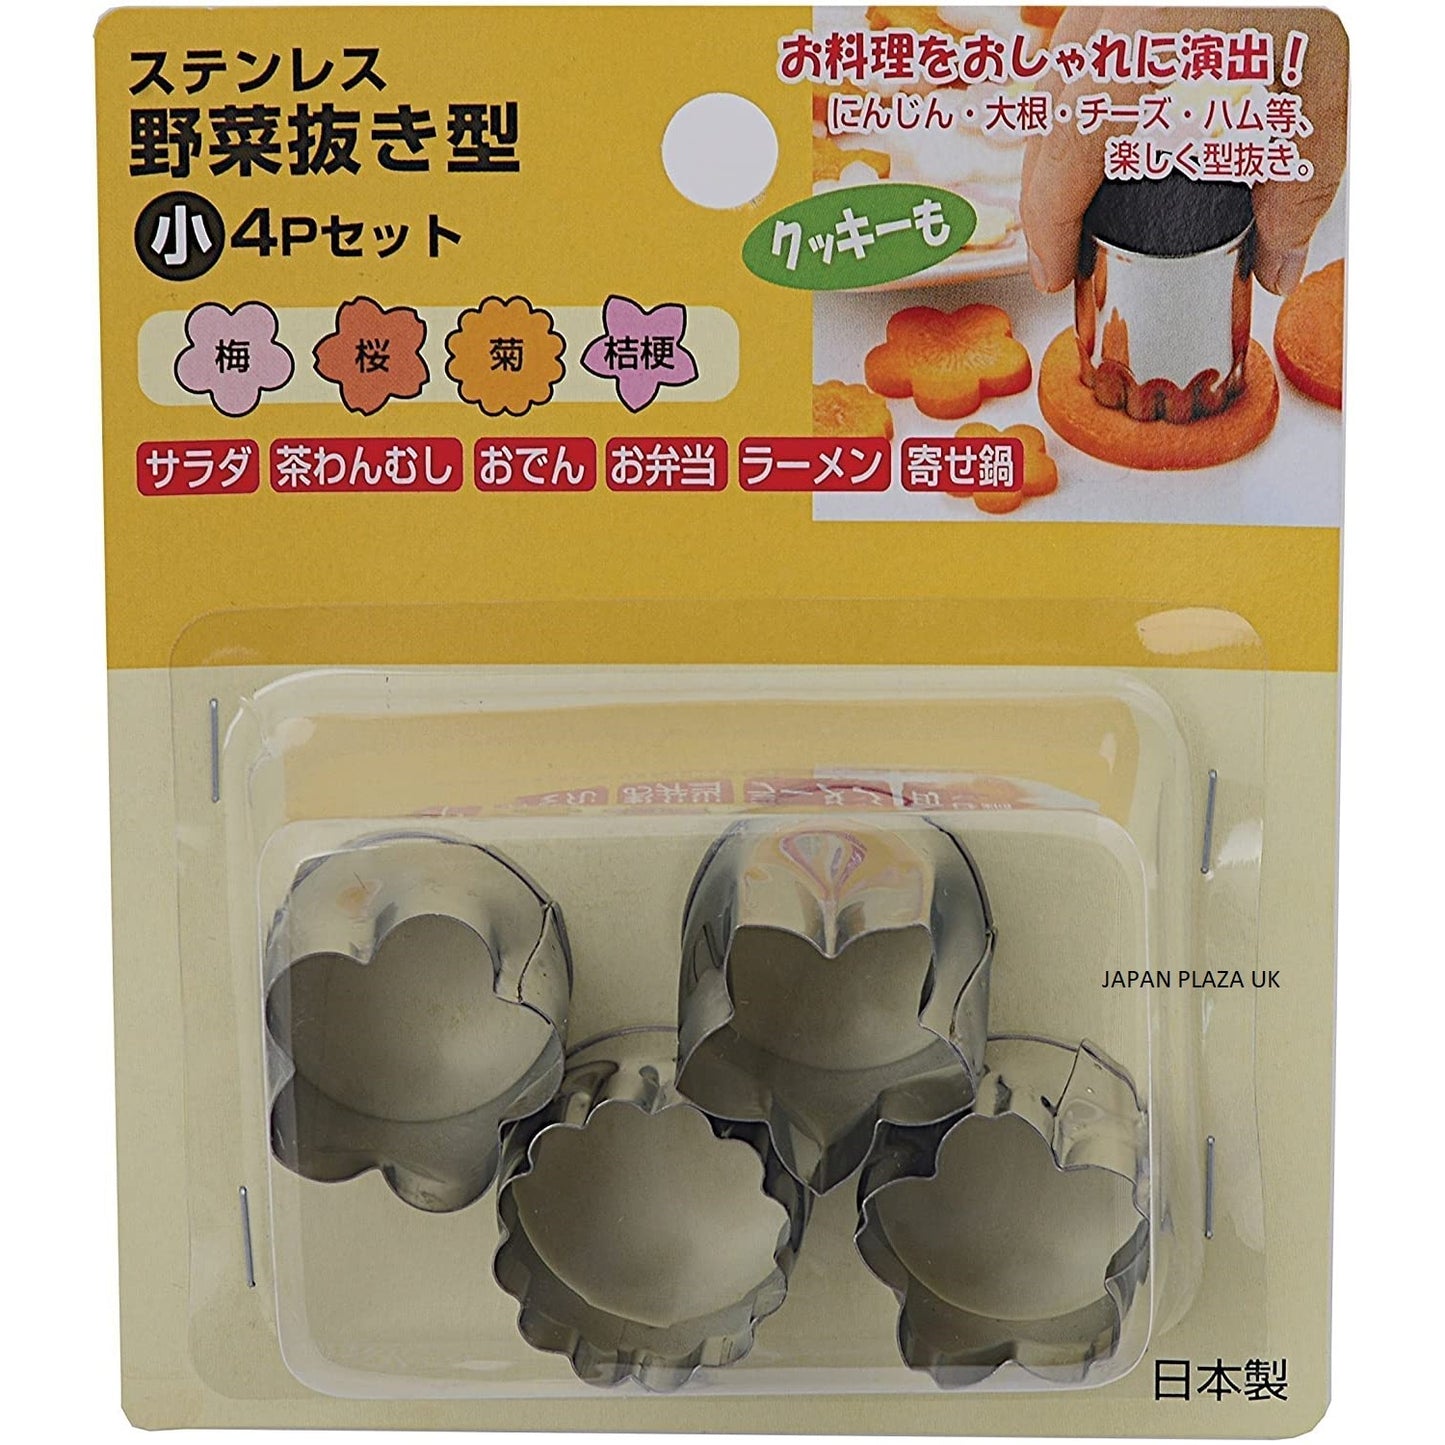 Stainless Steel Cookie/Vegetables Molds 4pcs (Made in Japan)